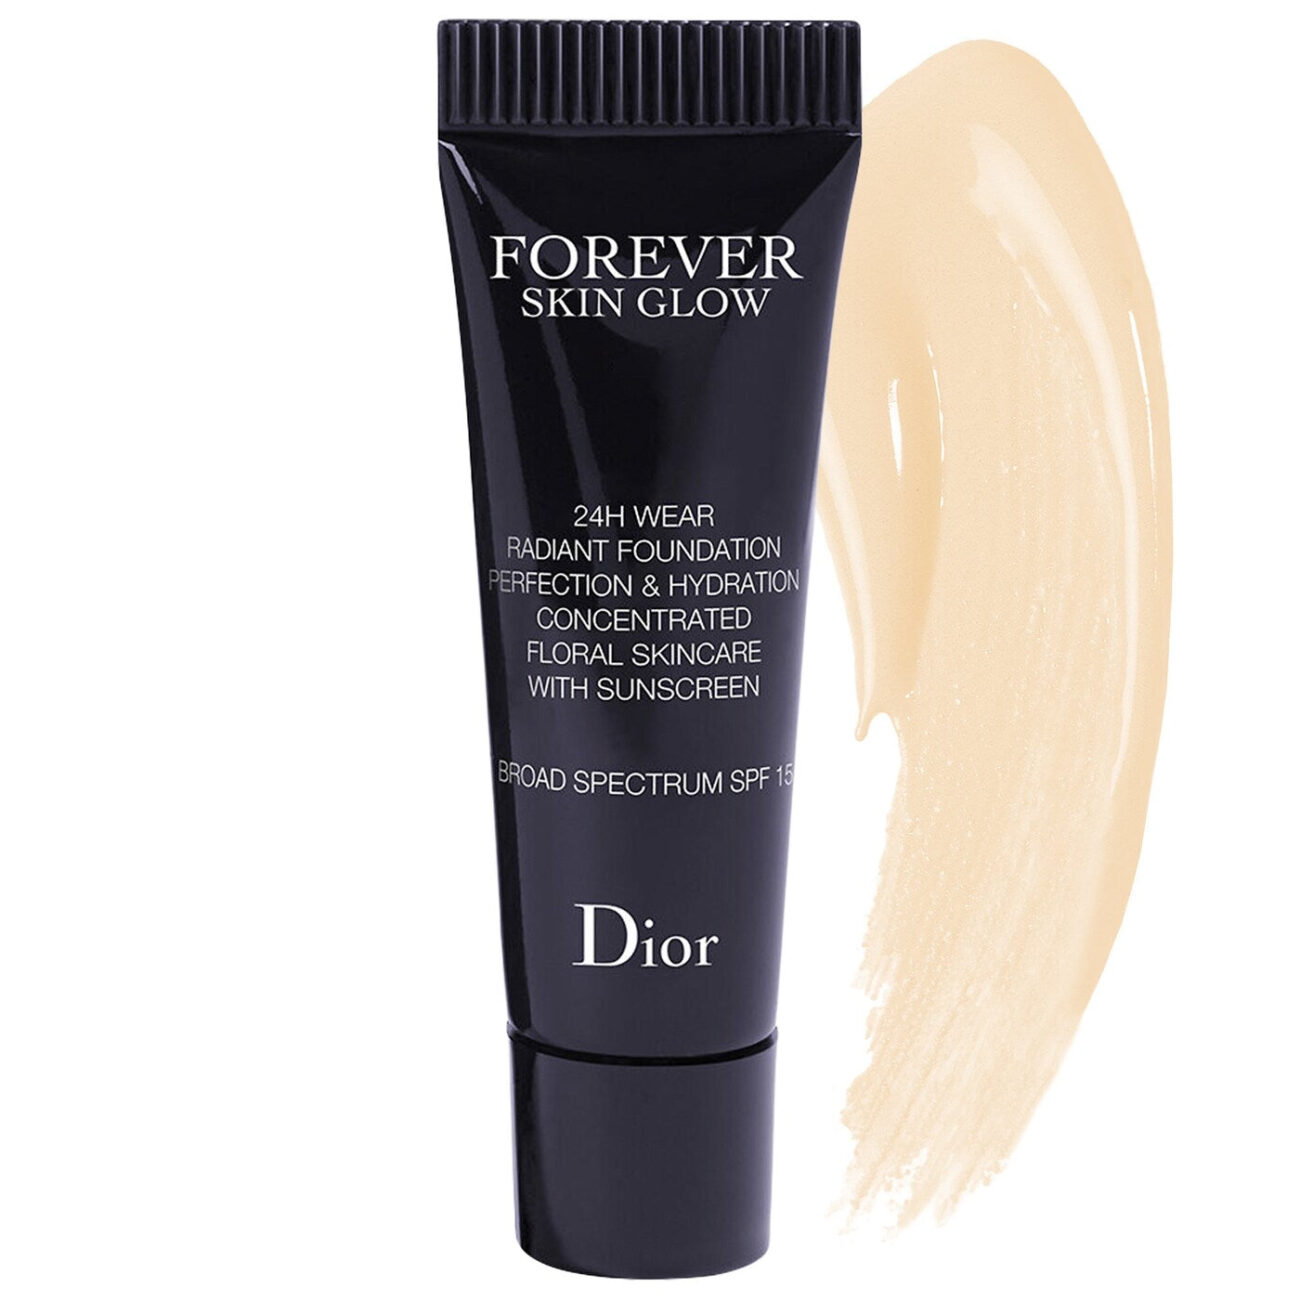 Forever Skin Glow Radiant Foundation trial size - 1N-DIOR